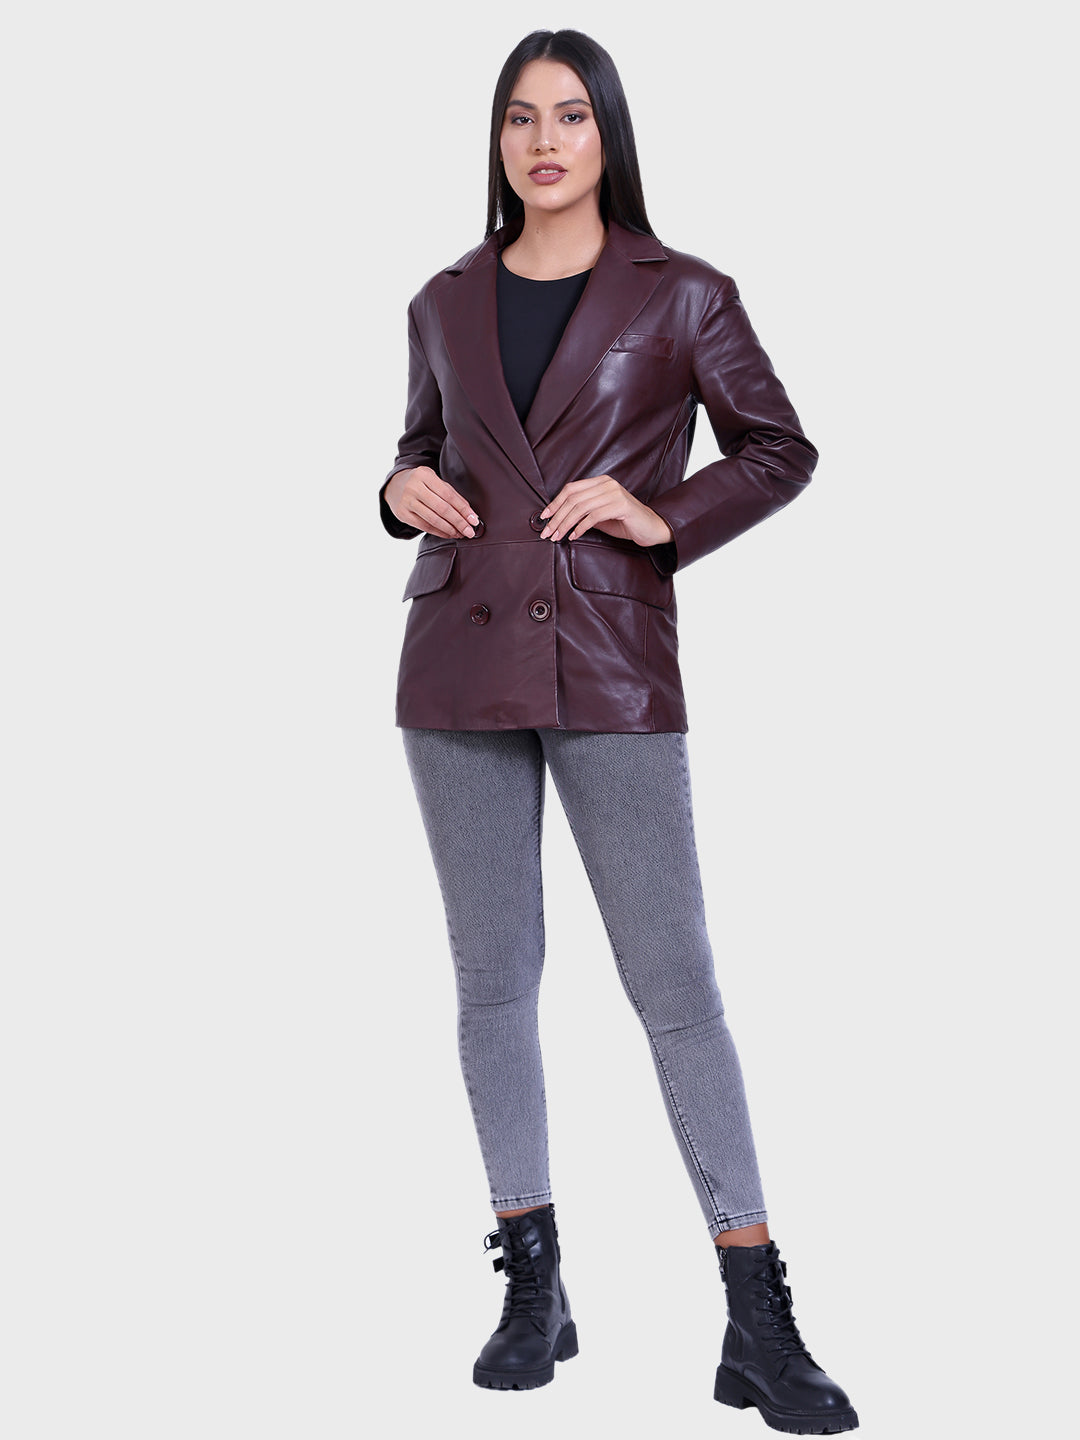 Justanned Chianti Flap Leather Jacket